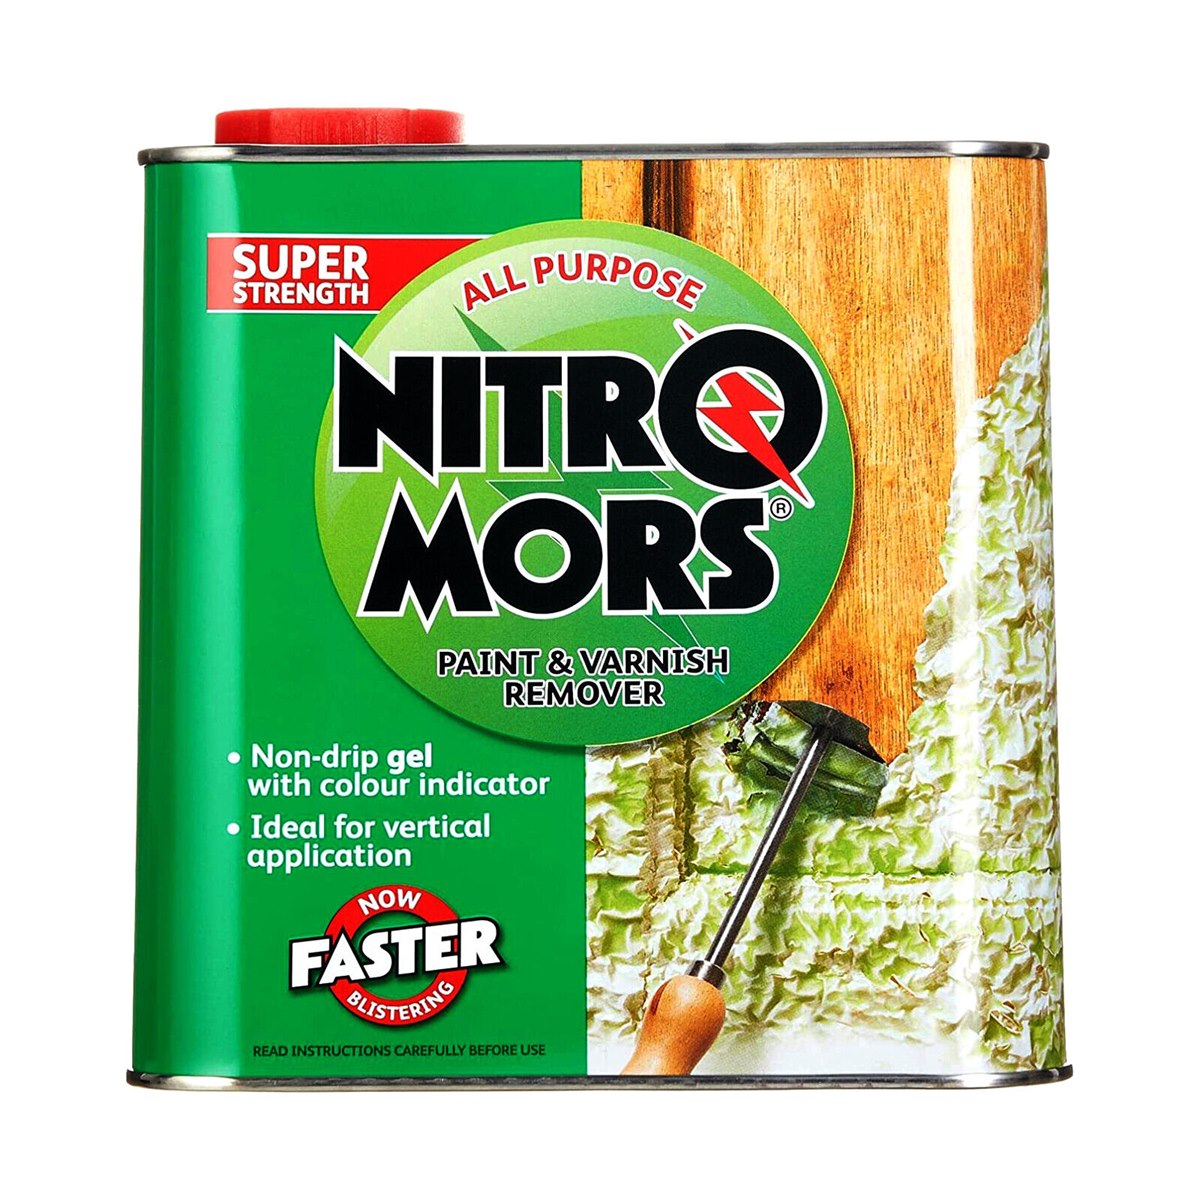 NitroMors All Purpose Paint and Varnish Remover 2 Litre